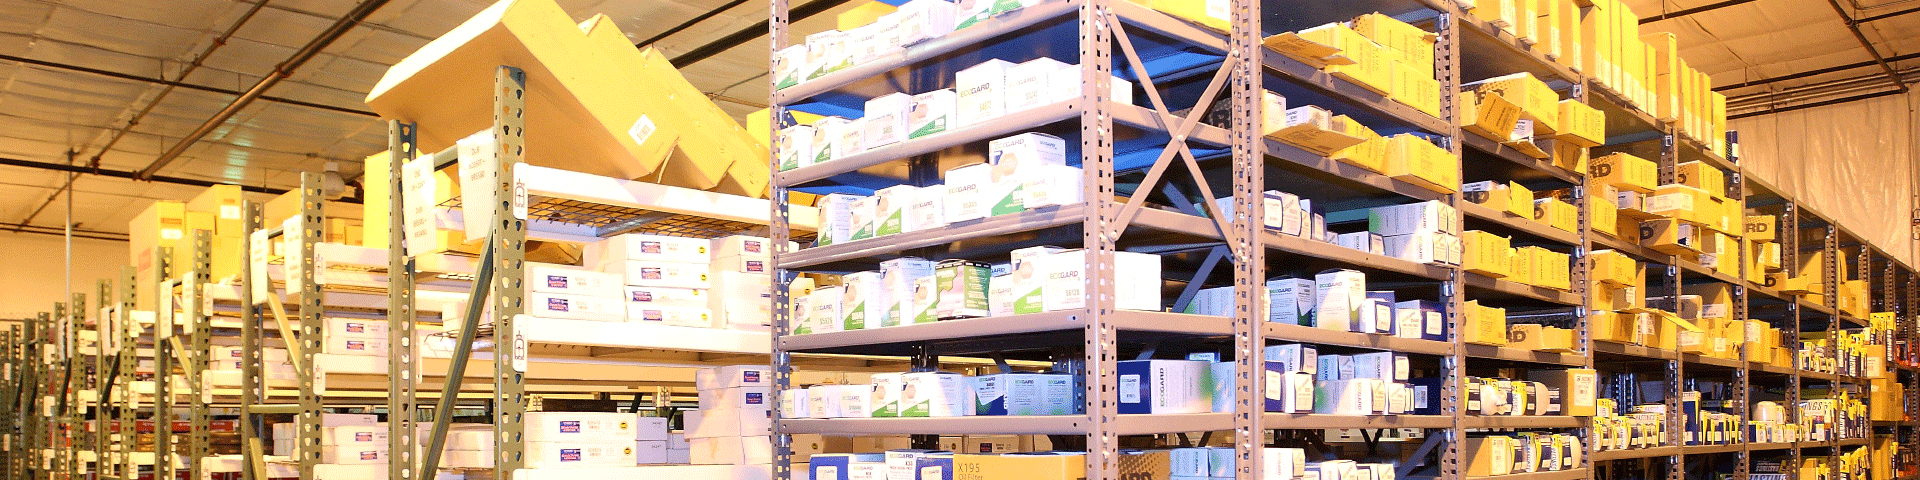 C&M Auto Parts warehouse shelves are stocked to the ceiling with car, truck and suv brake parts, filters, fans, belts, hoses, shocks, struts and wheel bearings.